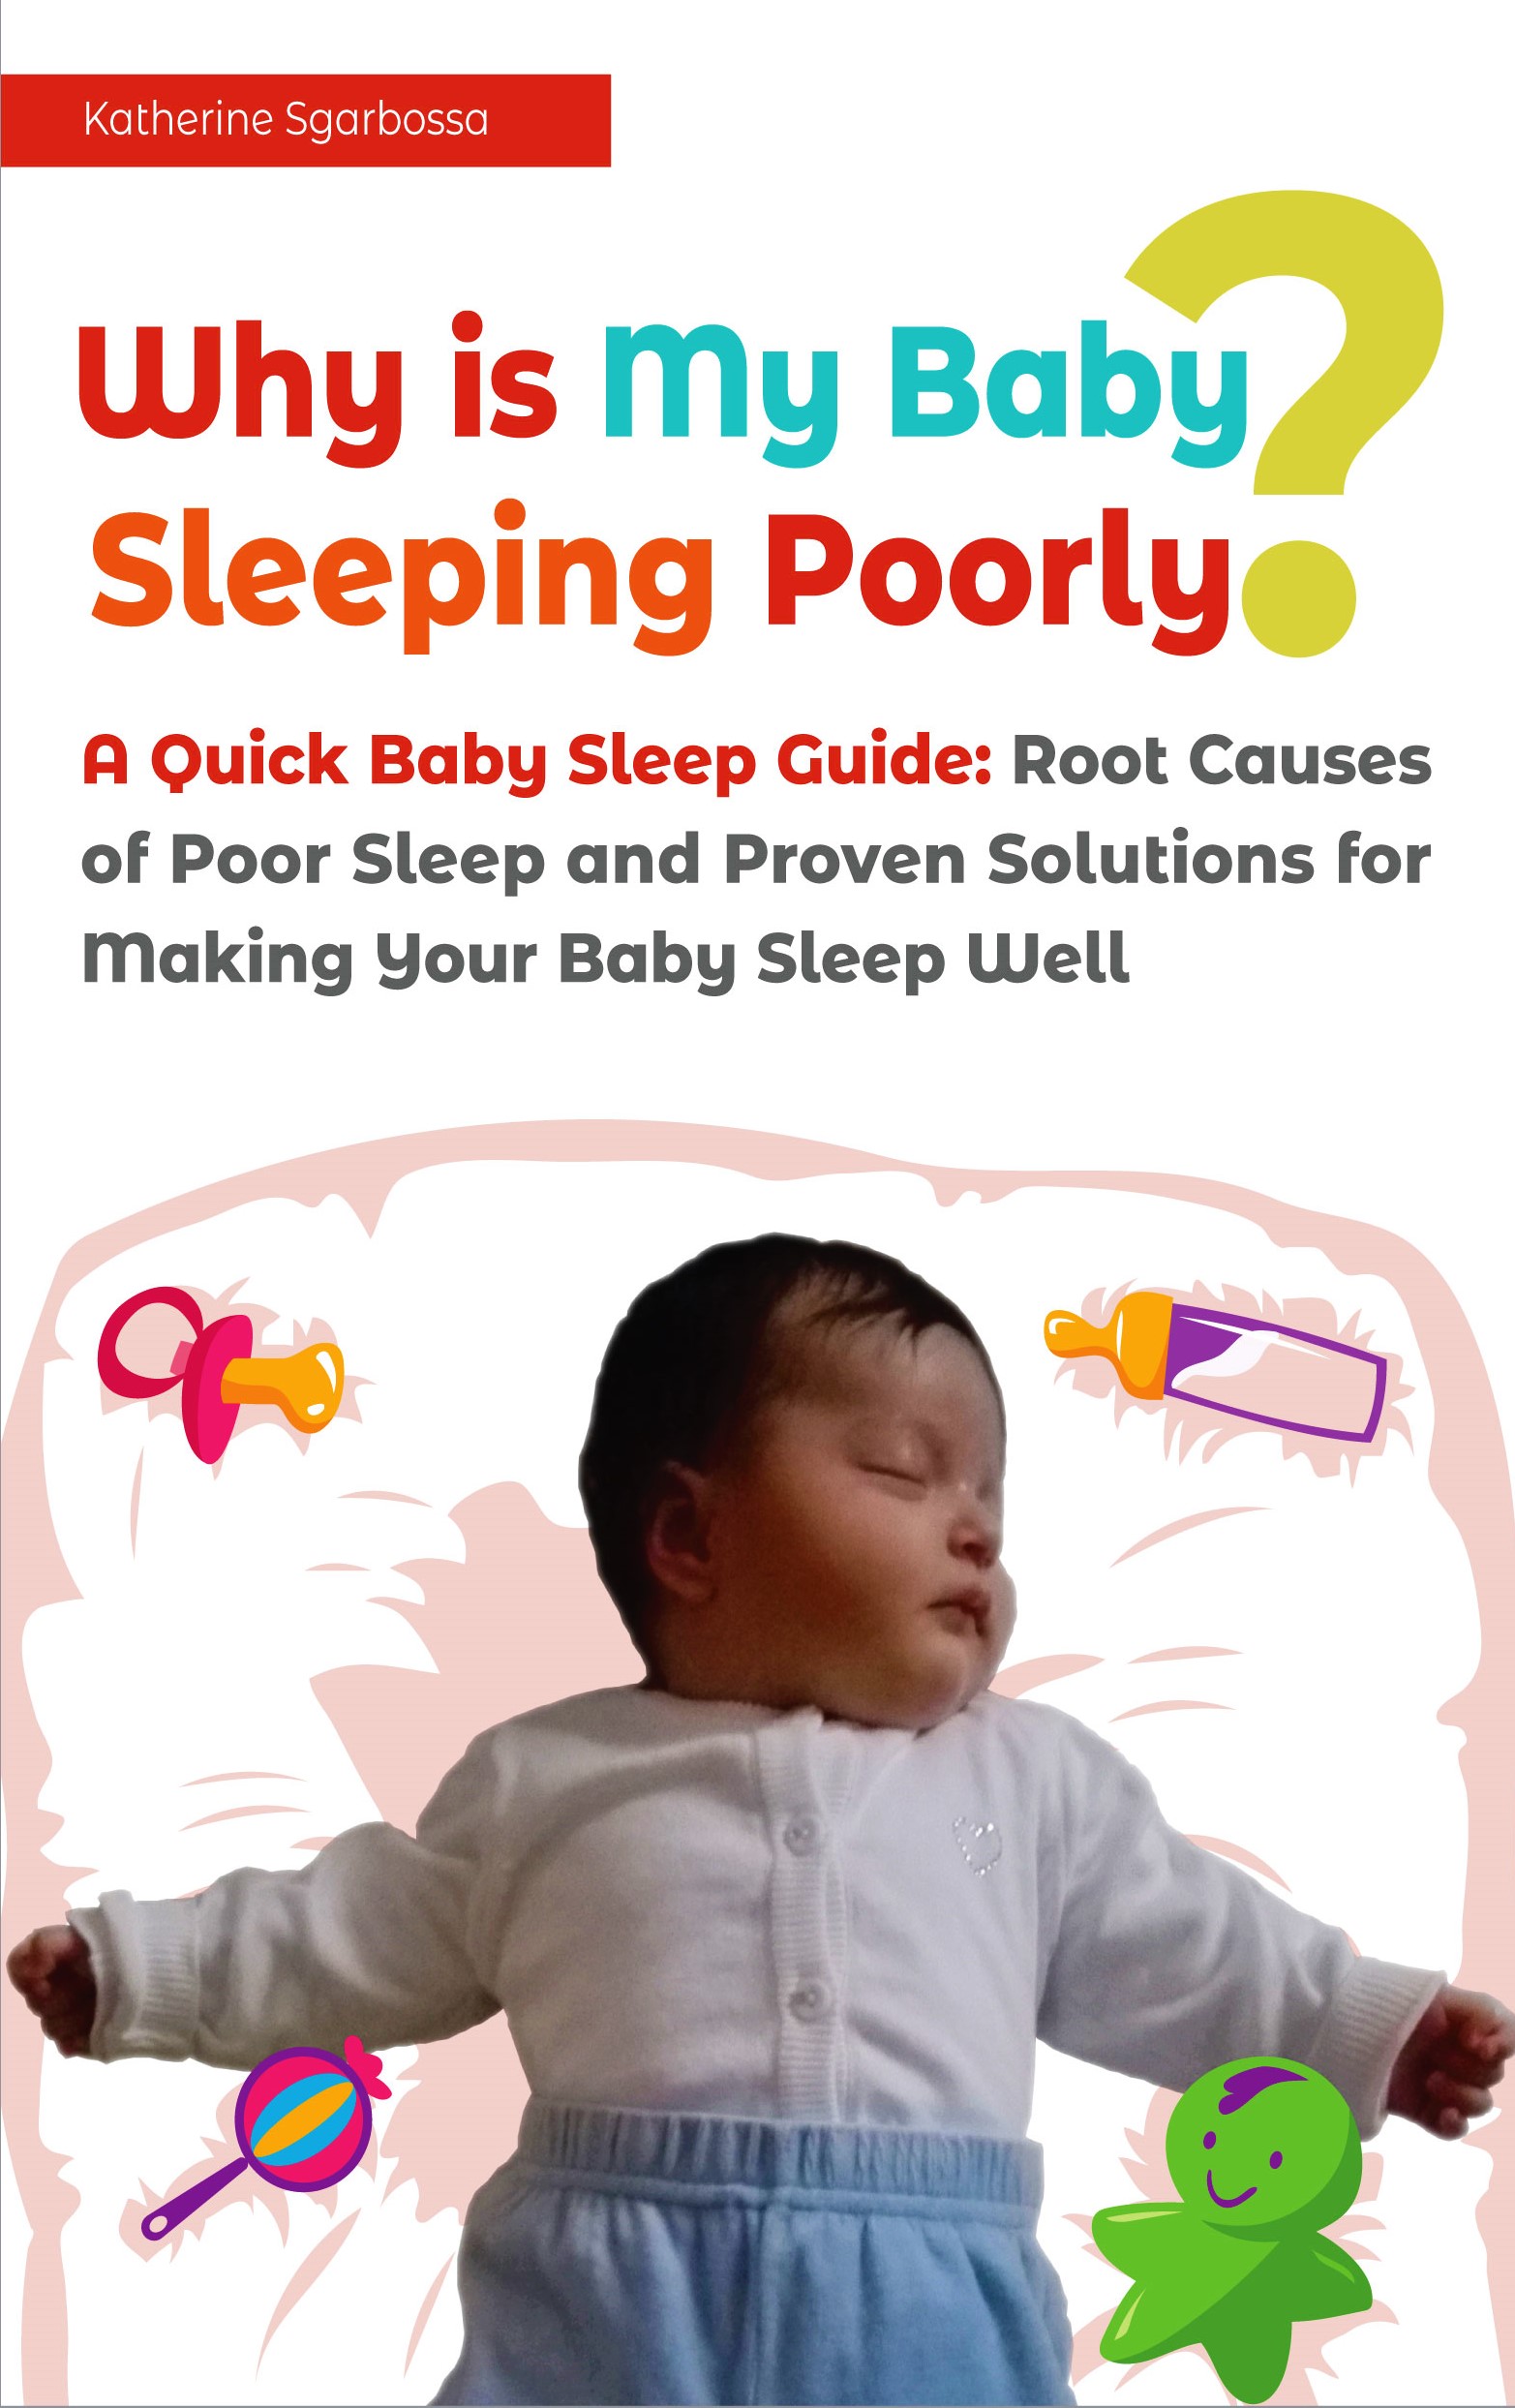 FREE: Why is My Baby Sleeping Poorly? A Quick Baby Sleep Guide: Root Causes of Poor Sleep and Proven Solutions for Making Your Baby Sleep Well by Katherine Sgarbossa